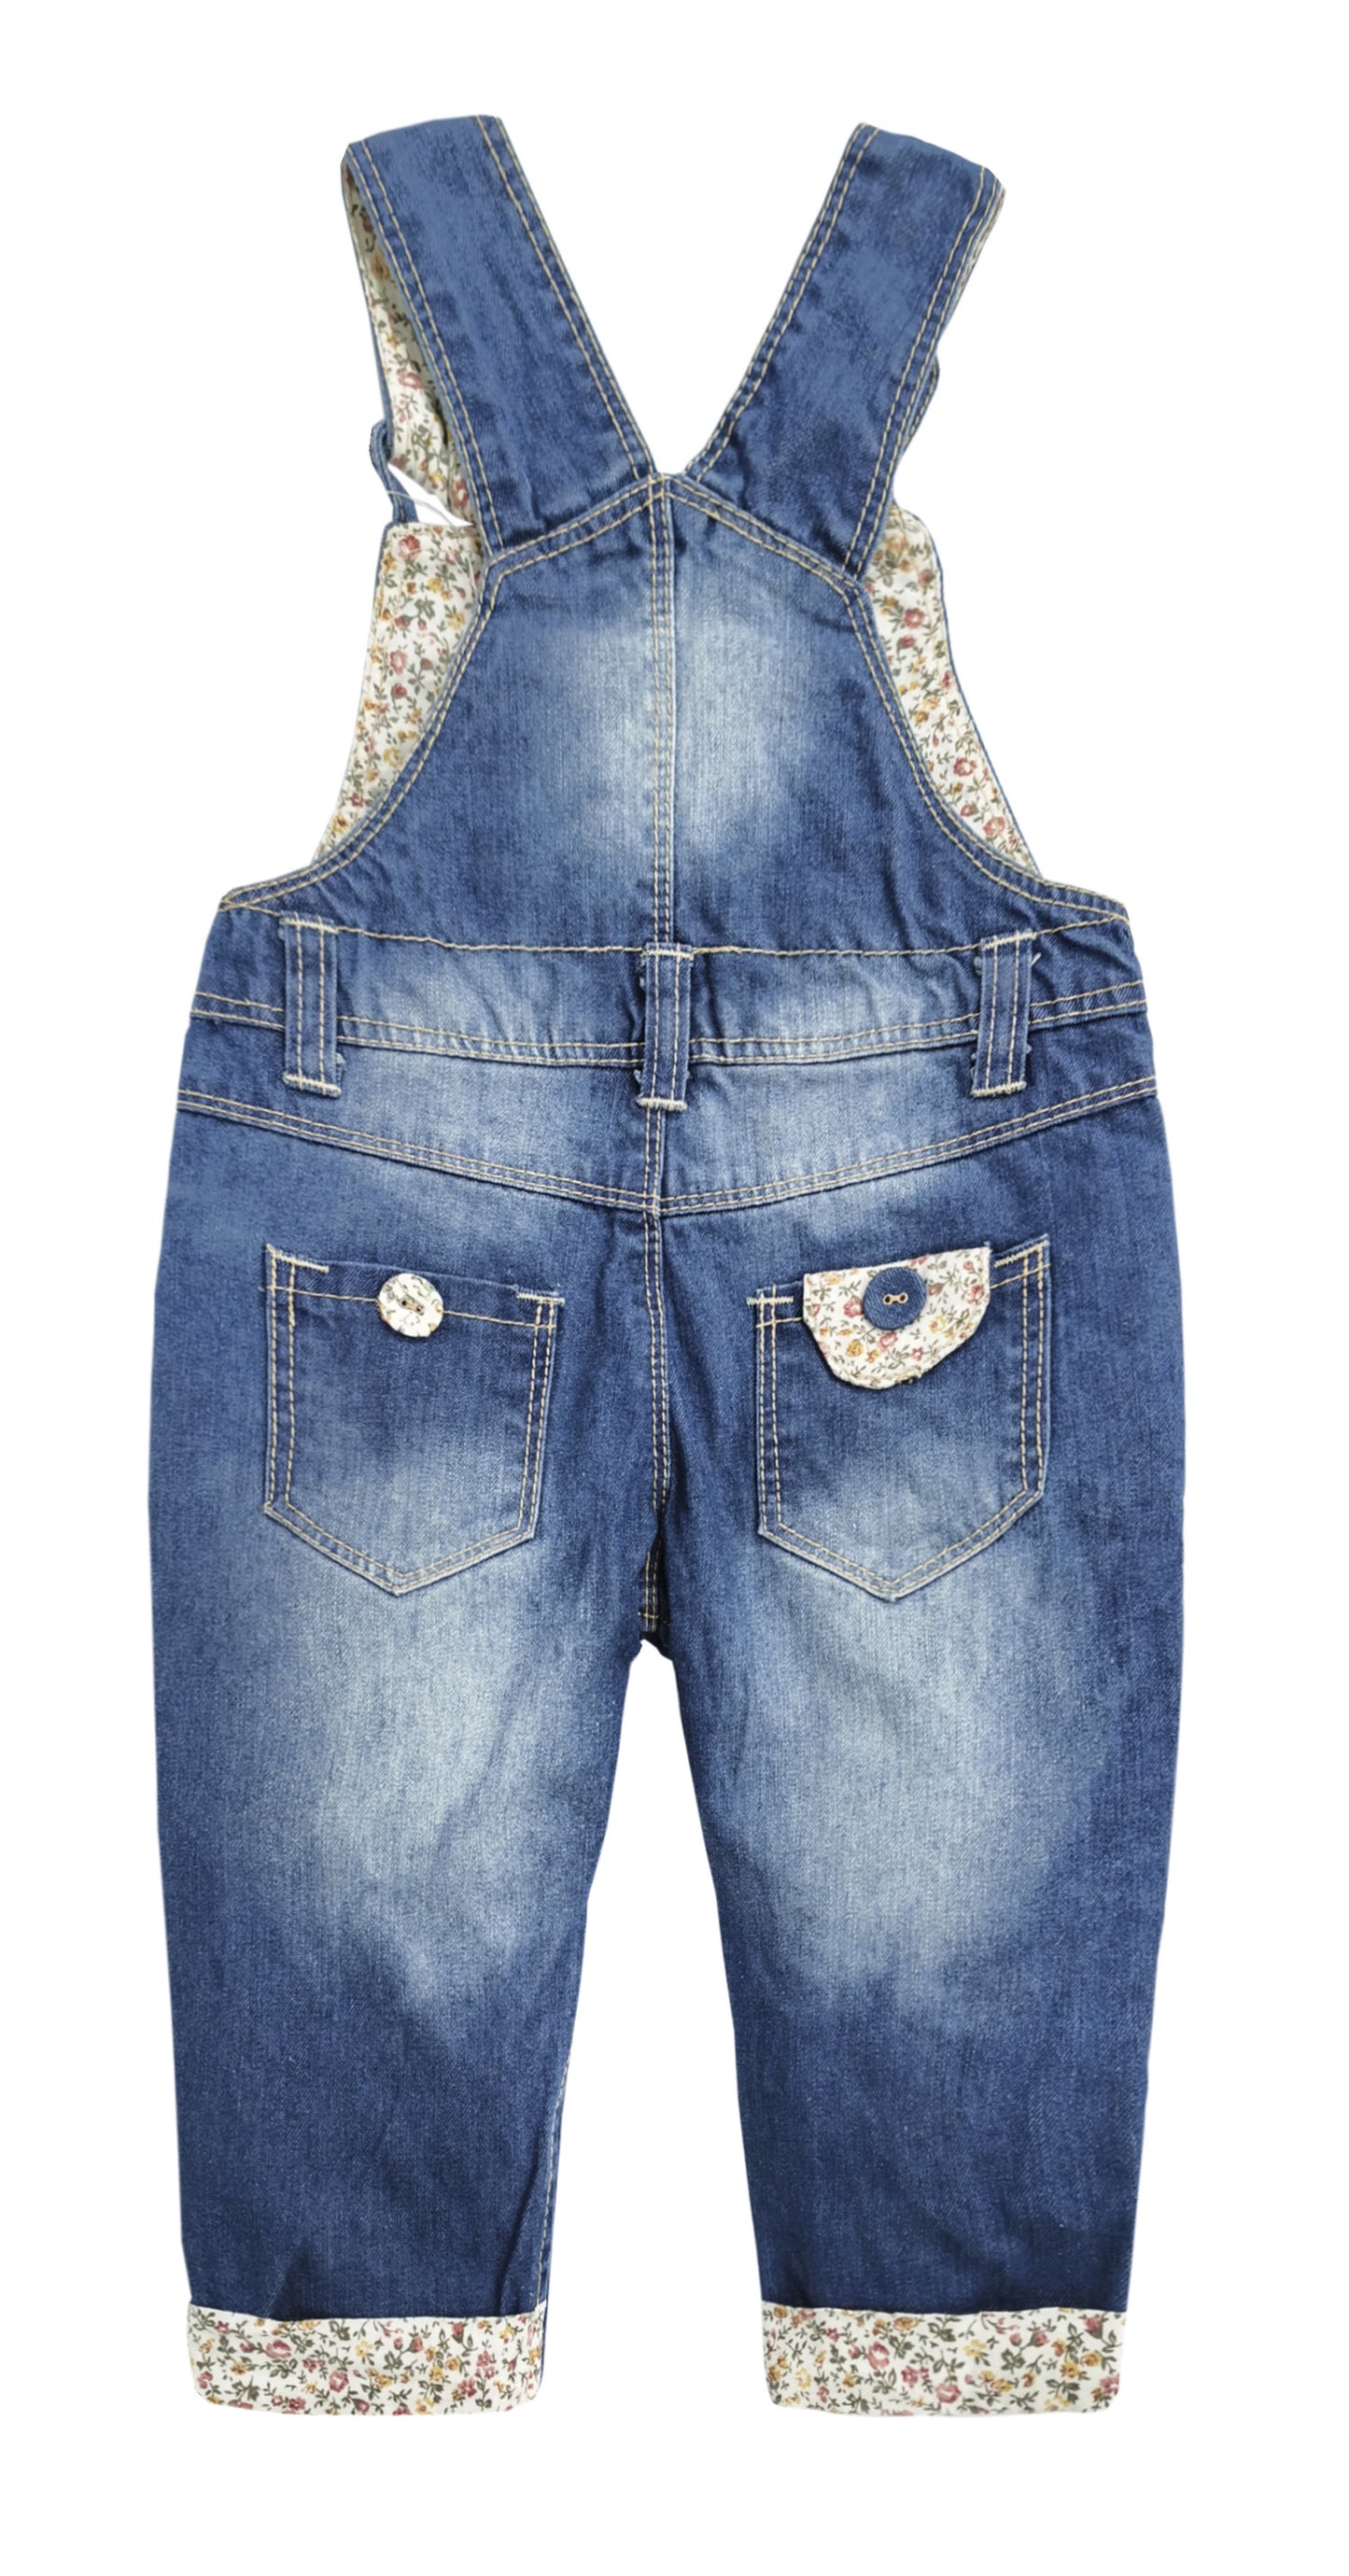 Unisex Baby Cute Embroidered Fashion Jean Pants Denim Overalls